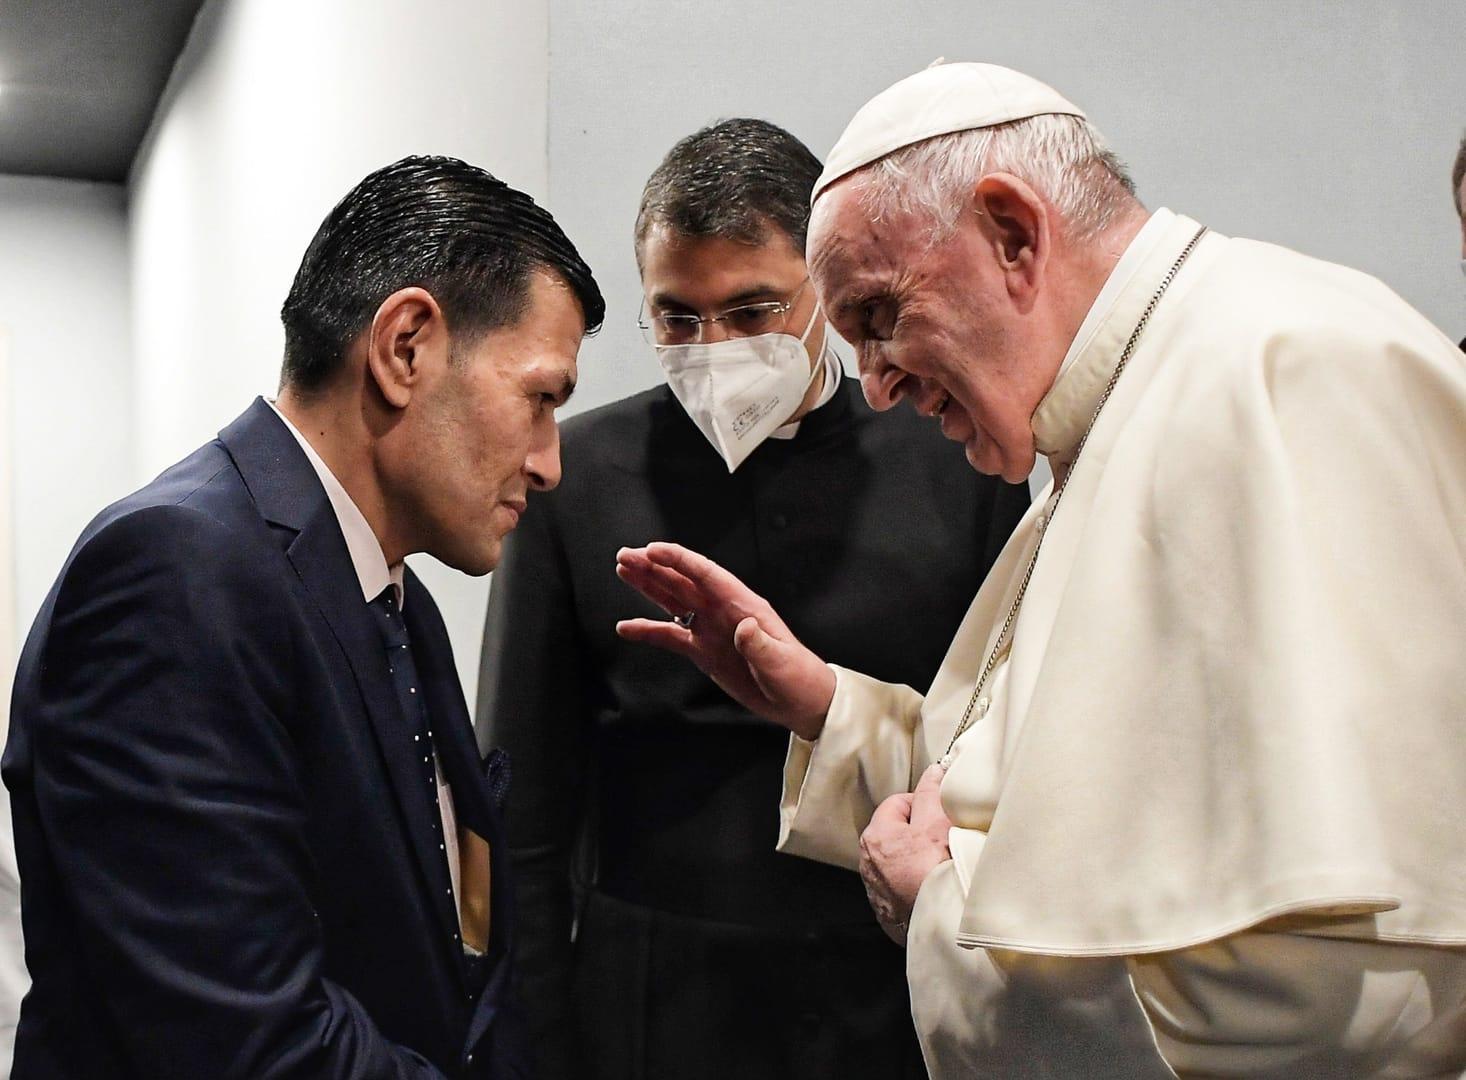 Pope meets father of drowned child whose image captured imaginations